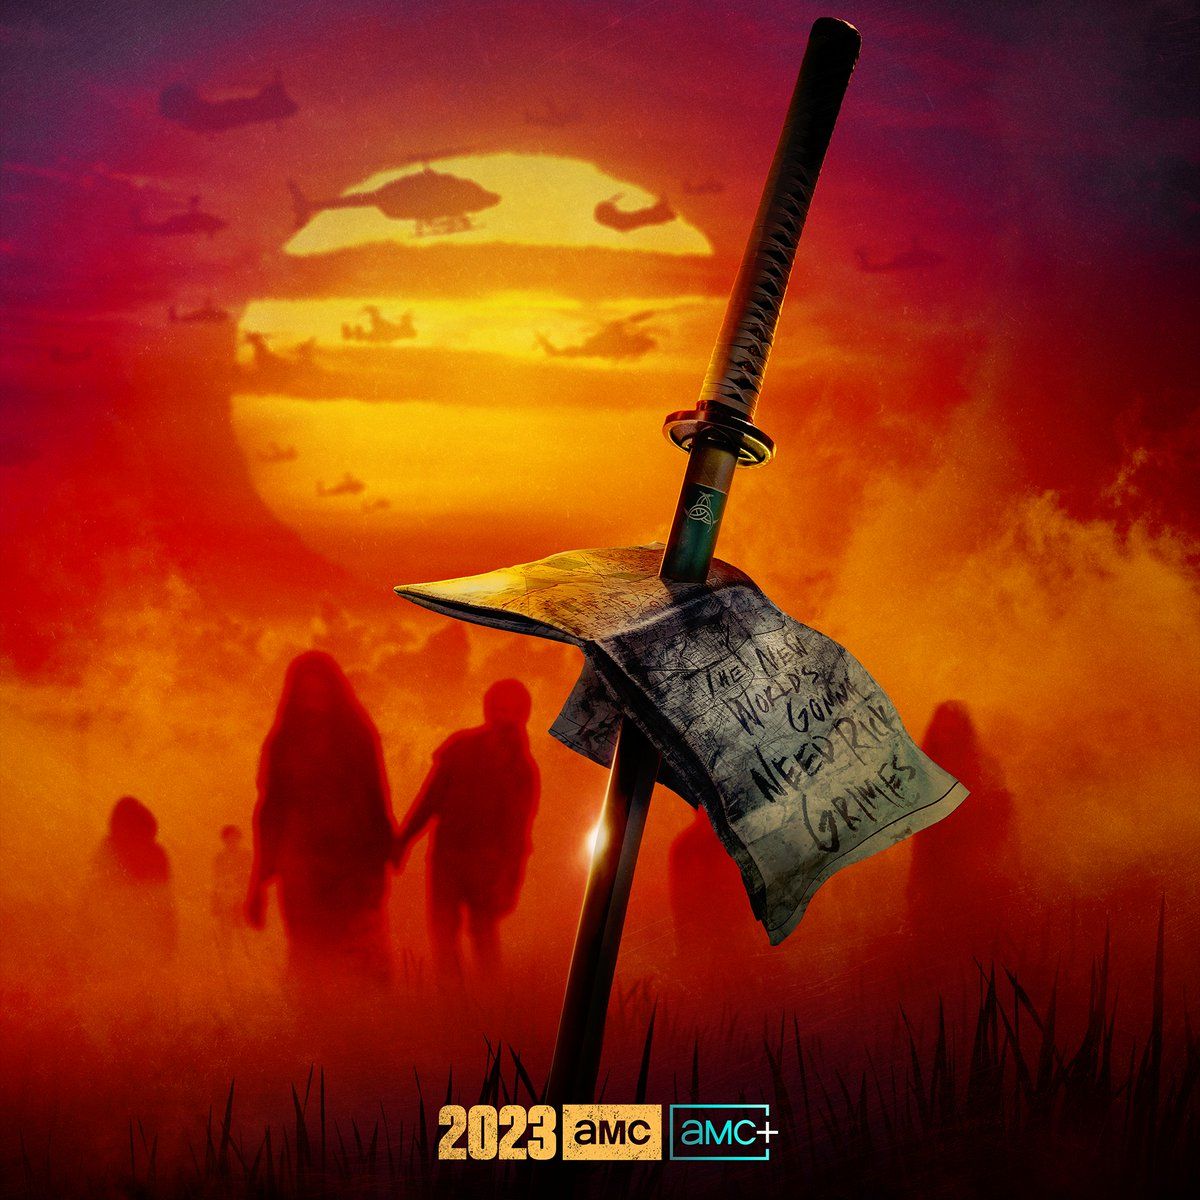 Walking Dead Rick Grimes and Michonne spinoff show teaser poster full size